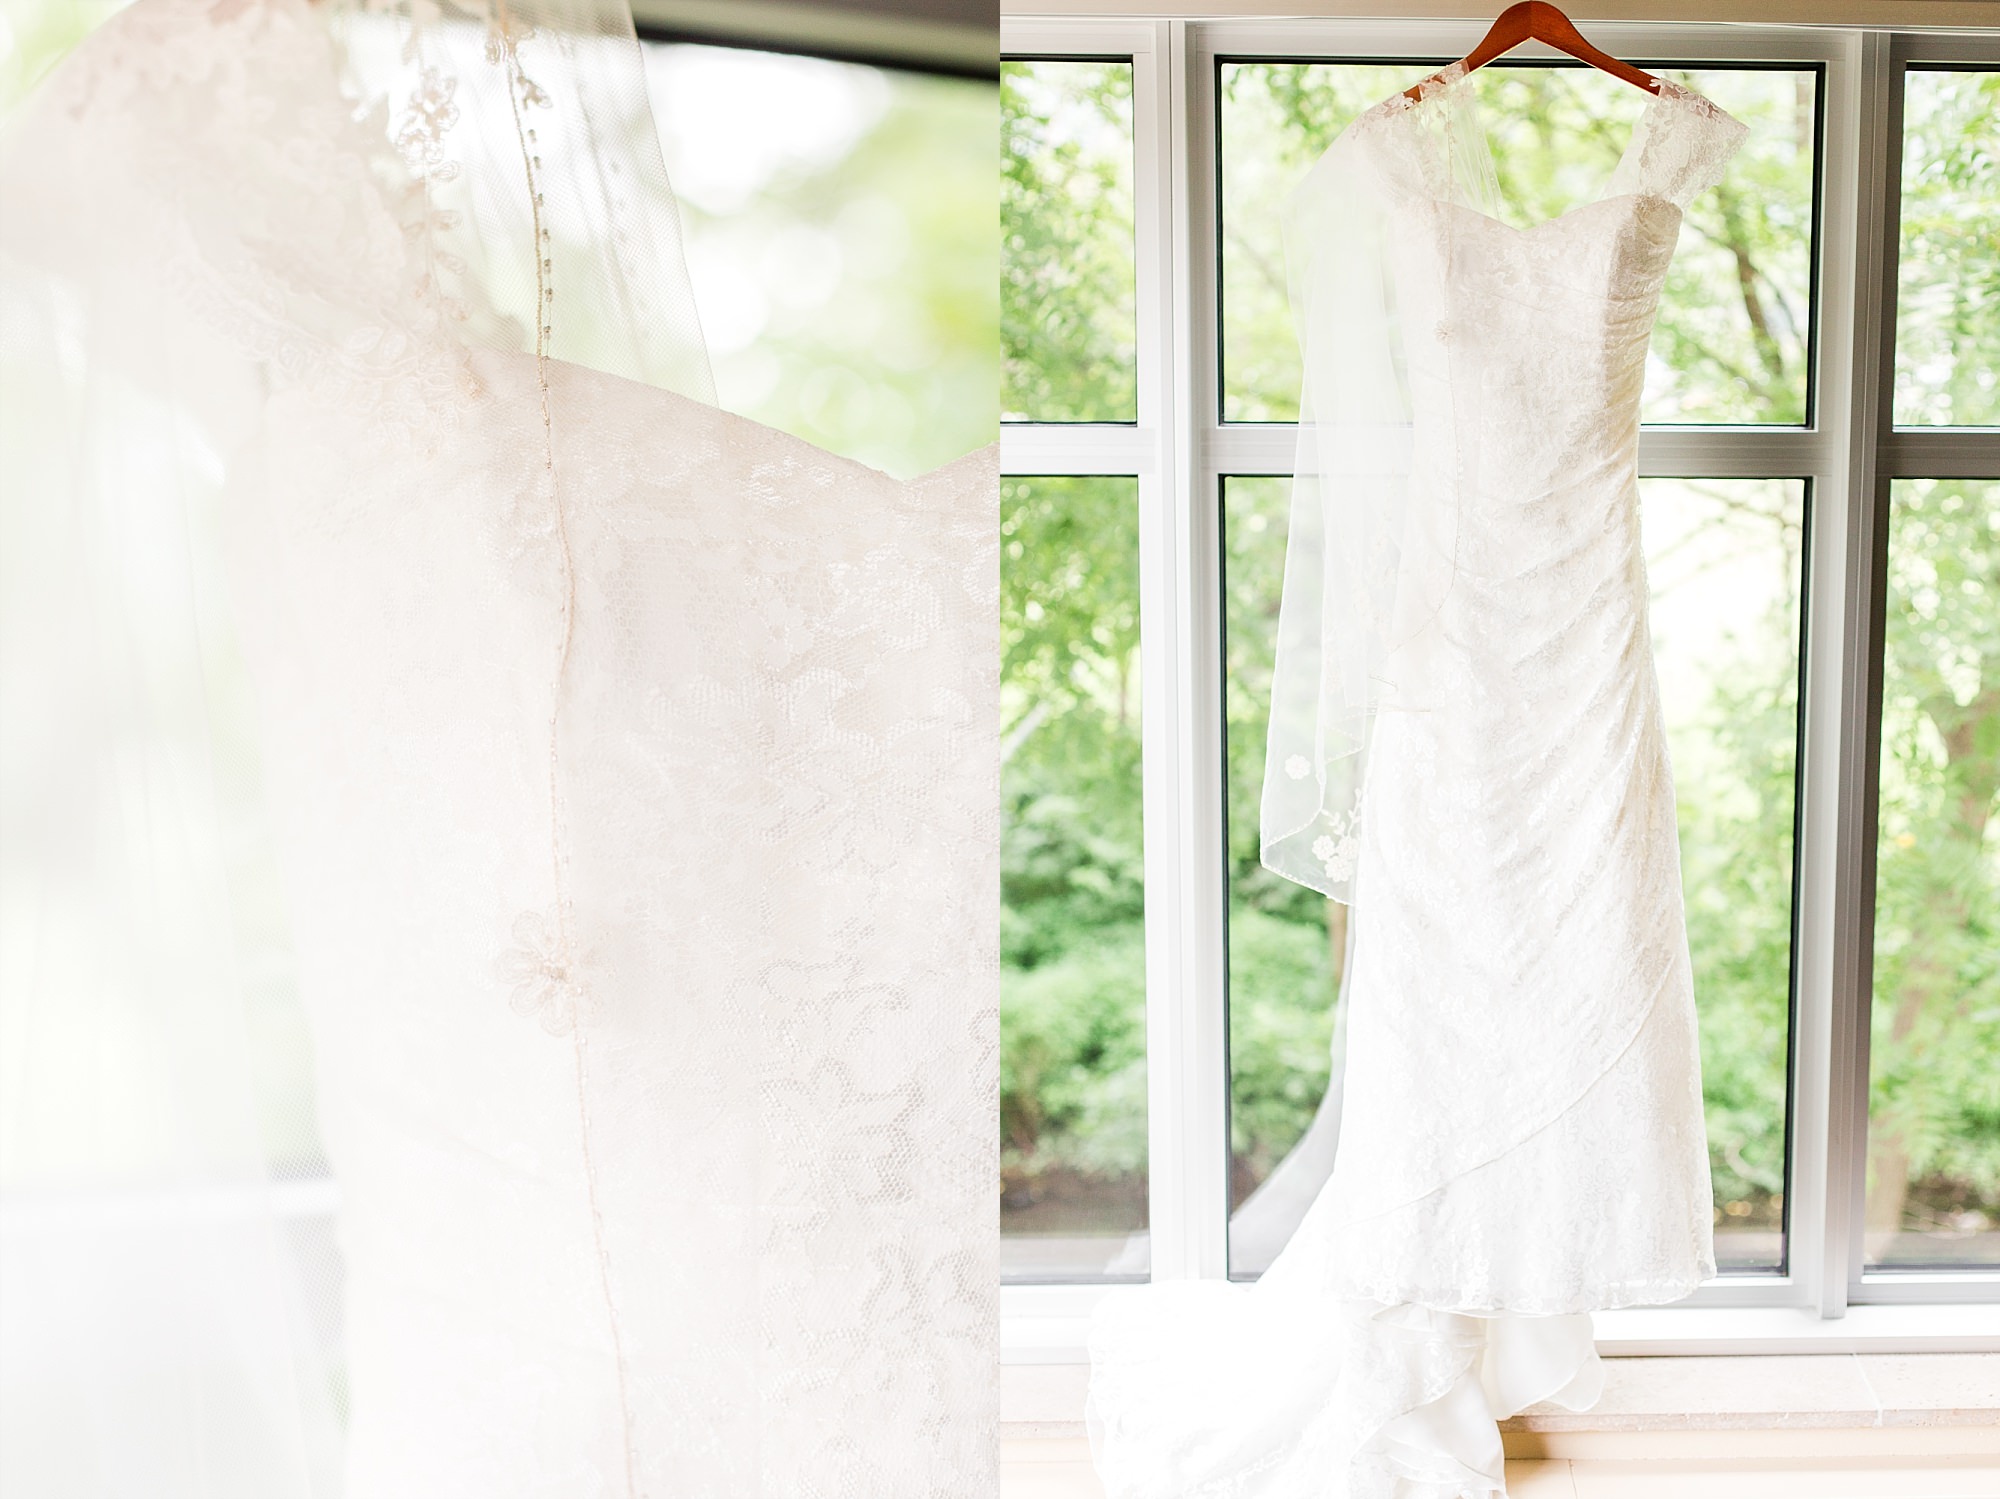 Wedding dress with cap sleeves hangs in front of a window